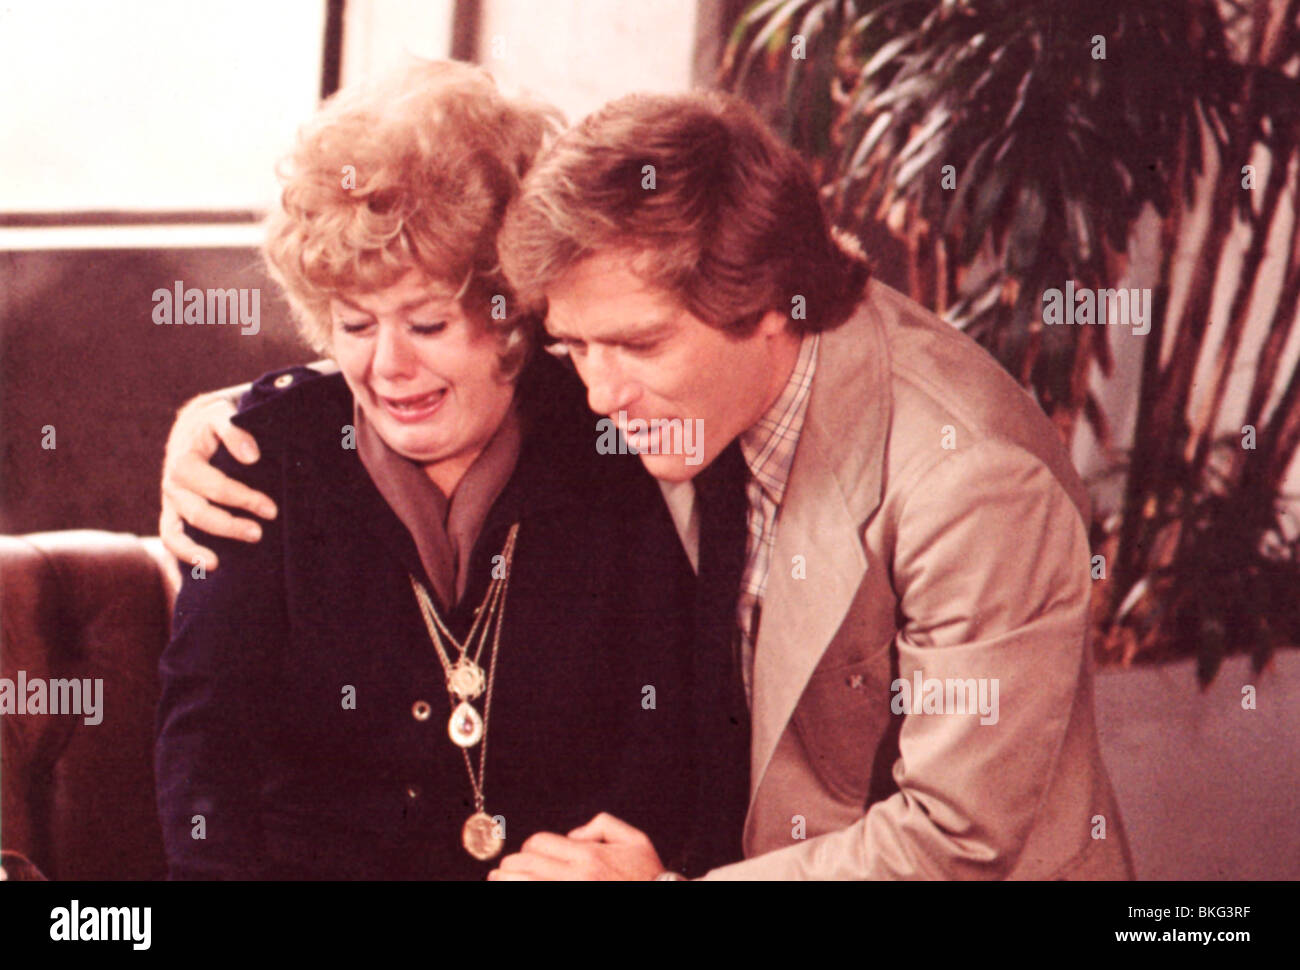 BLUME IN LOVE (1973), Shelley Winters, GEORGE SEGAL BLLV 003 Banque D'Images